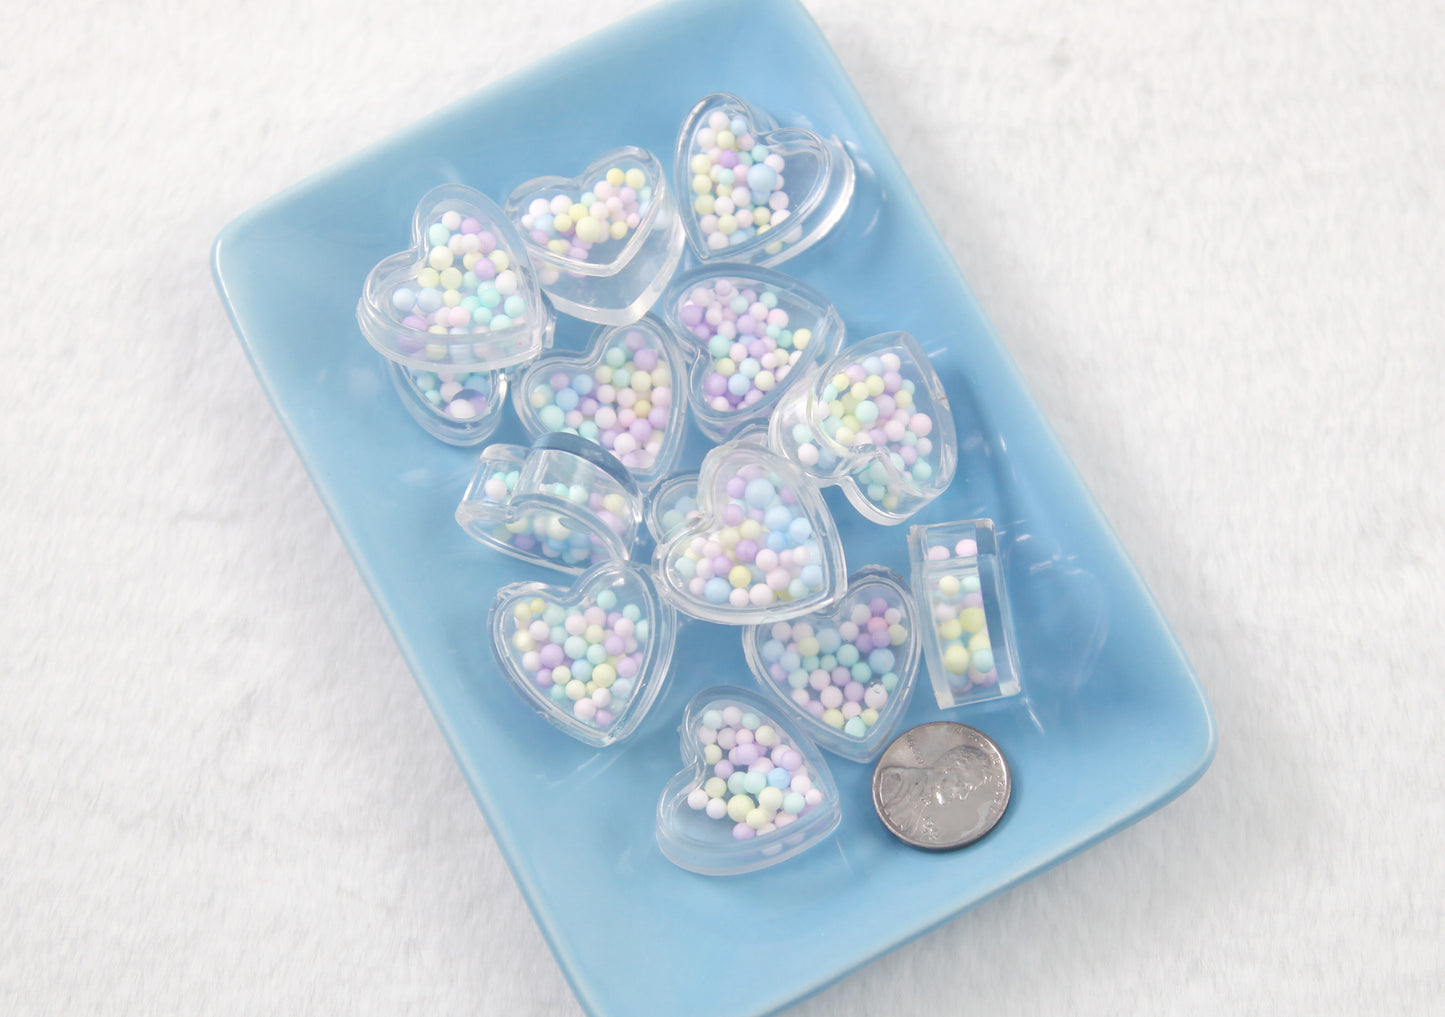 Pastel Charms - 5 pcs - 24mm Pastel Shaker Charms or Flat Backs - Cute Resin Cabochons for crafts!